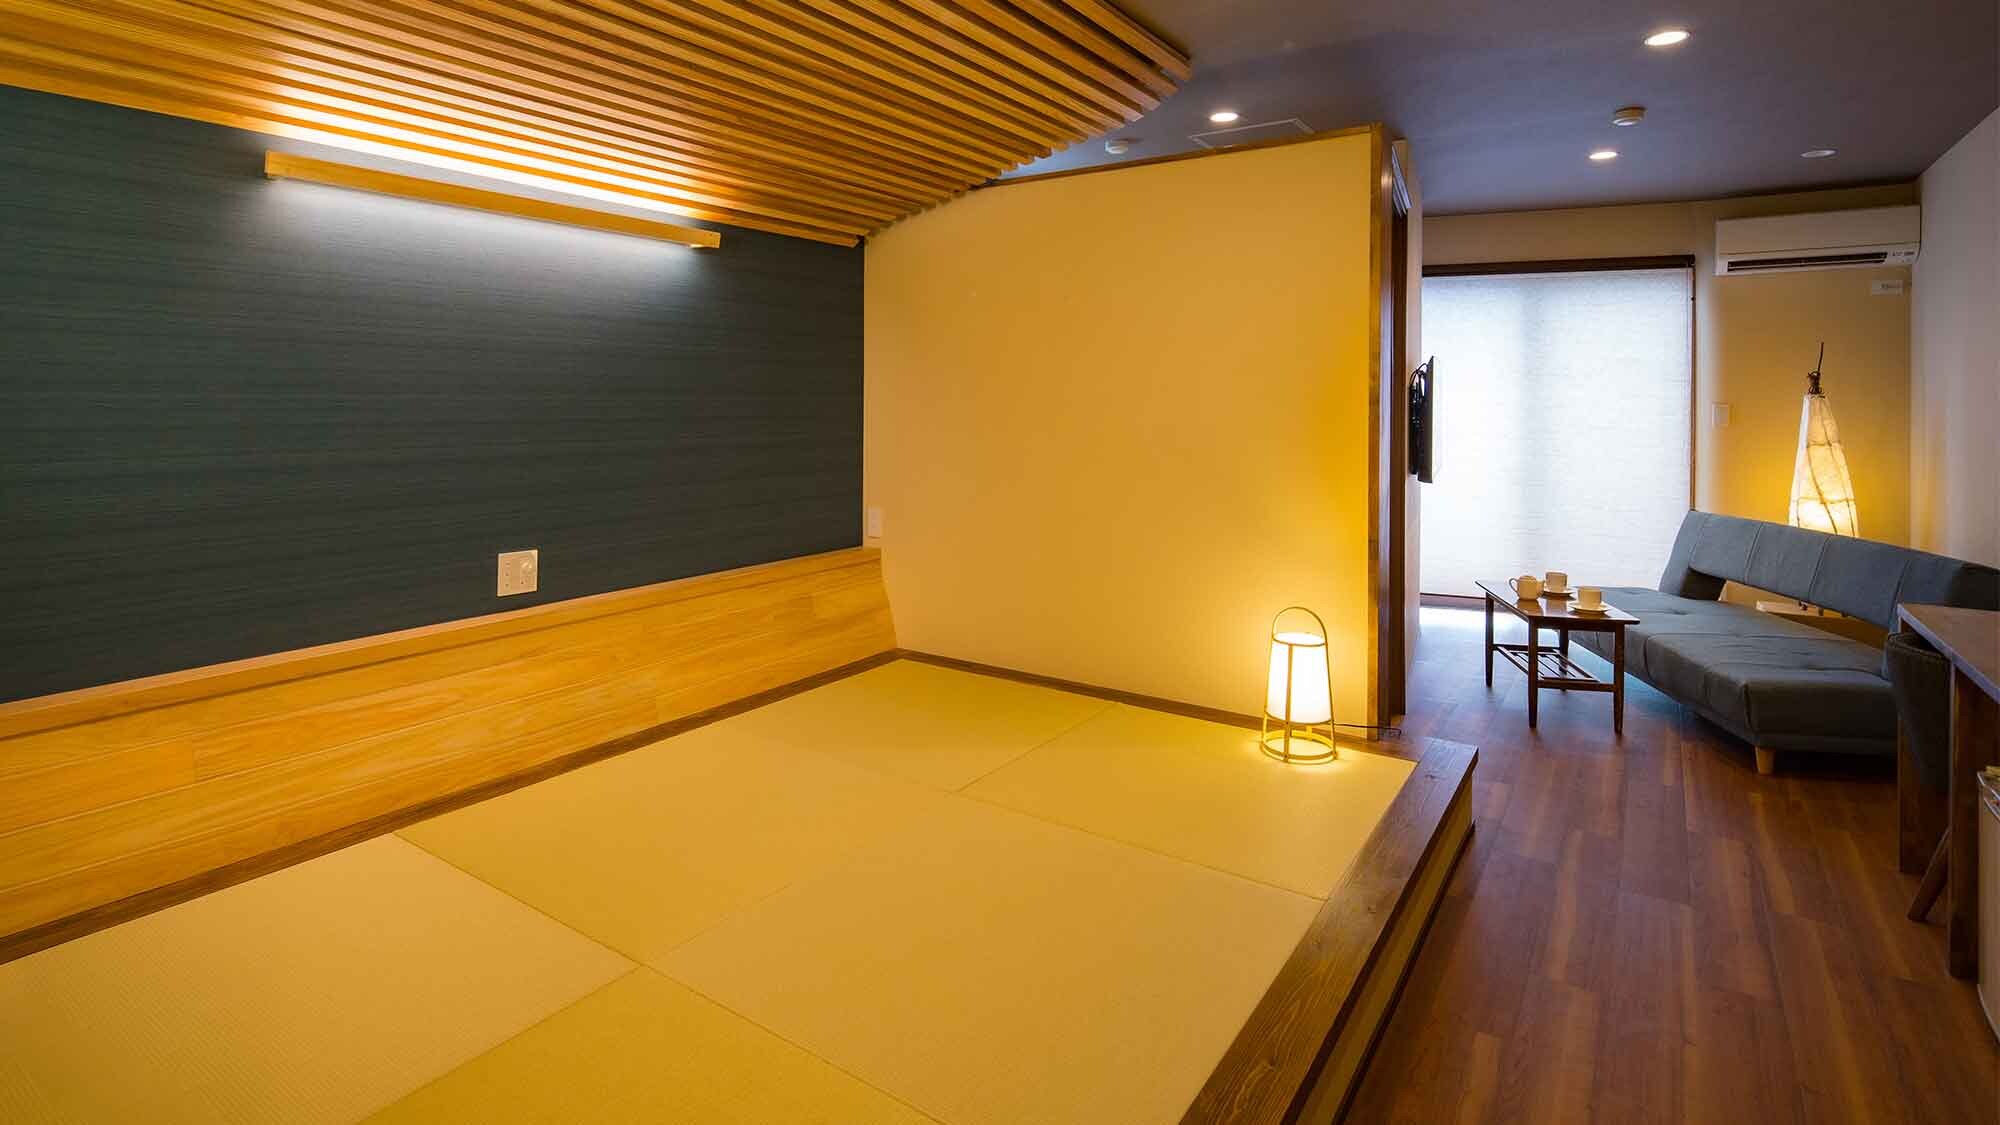 ・[Example of a Japanese-style room with a bath with a view] If you put away the futon, you can use it as a tatami space